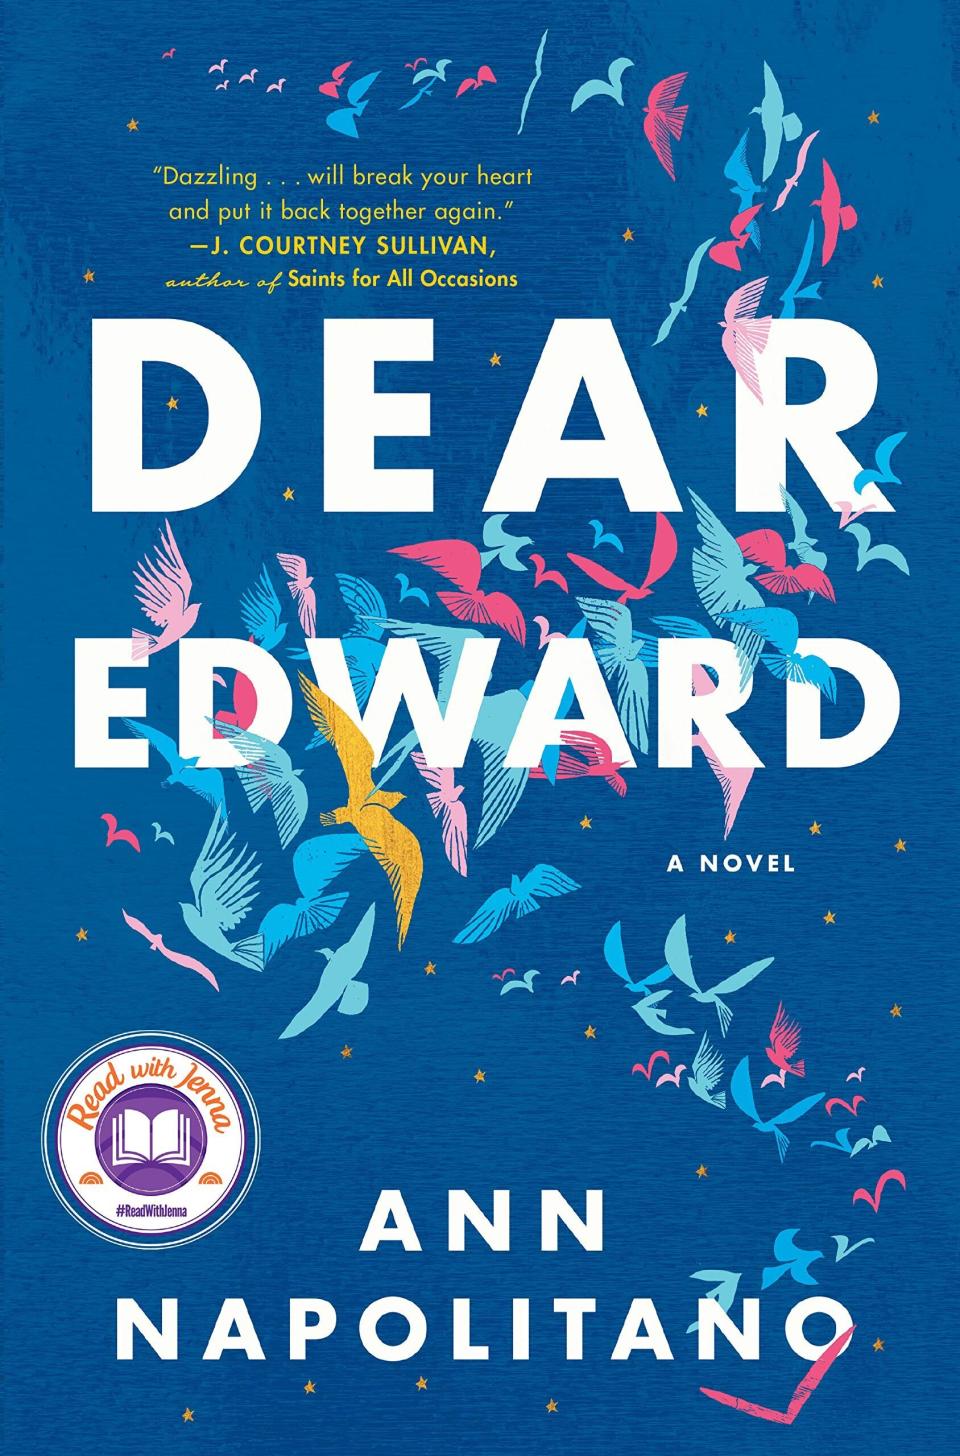 One summer morning, 12-year-old Edward Adler boards a plane to Los Angeles with his family and 183 other passengers. The plane tragically crashes, leaving Edward as the sole survivor. Inspired by a true story, &ldquo;Dear Edward&rdquo; follows the title character on his journey to rediscover his place in the world. Read more about it <a href="https://www.goodreads.com/book/show/45294613-dear-edward" target="_blank" rel="noopener noreferrer">on Goodreads</a>, and <a href="https://amzn.to/2T4Z5BG" target="_blank" rel="noopener noreferrer">grab a copy on Amazon</a>. &lt;br&gt;&lt;br&gt;<i>Expected release date Jan. 6</i>